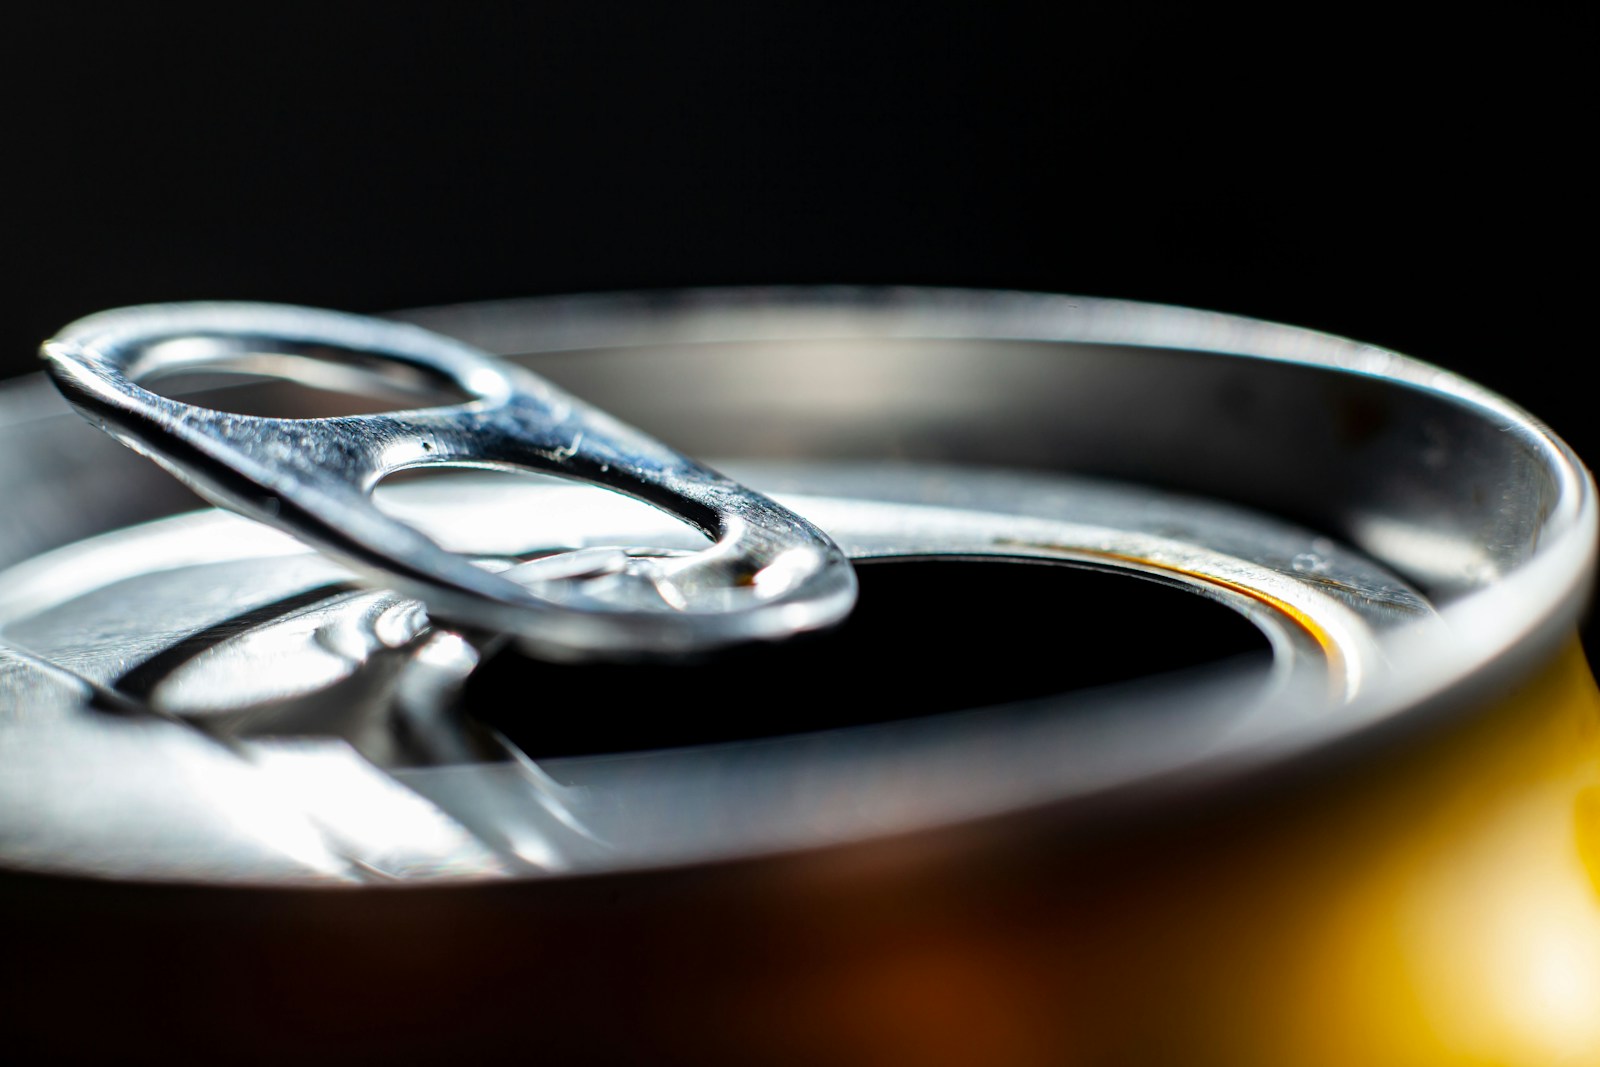 Aluminum Cans May Reduce Potency Of Cannabis Drinks